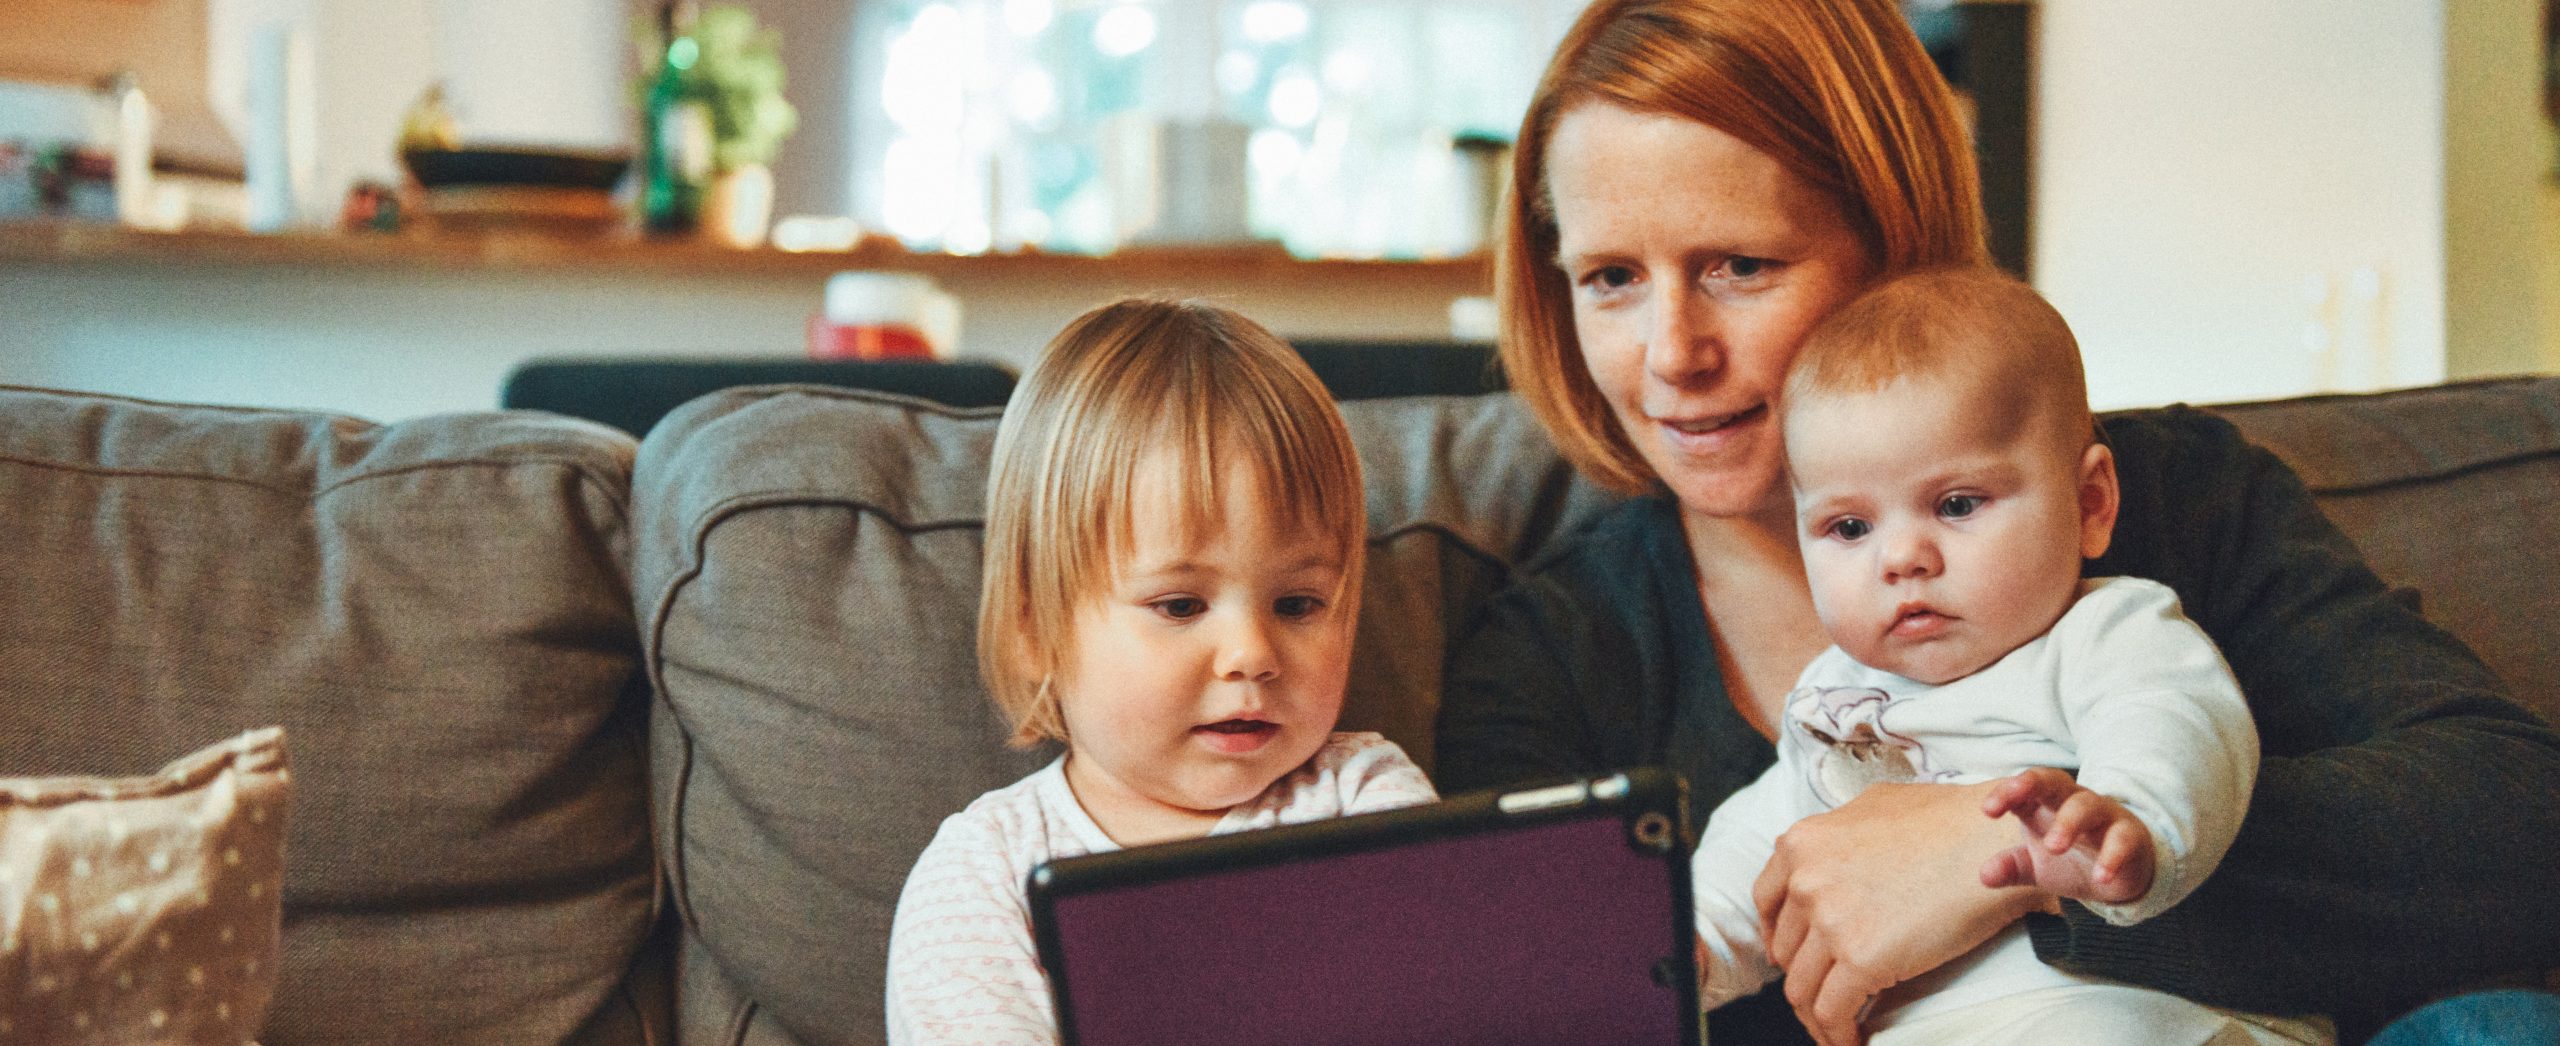 A mother with a baby on her lap and a toddler sitting beside her looks at a tablet screen